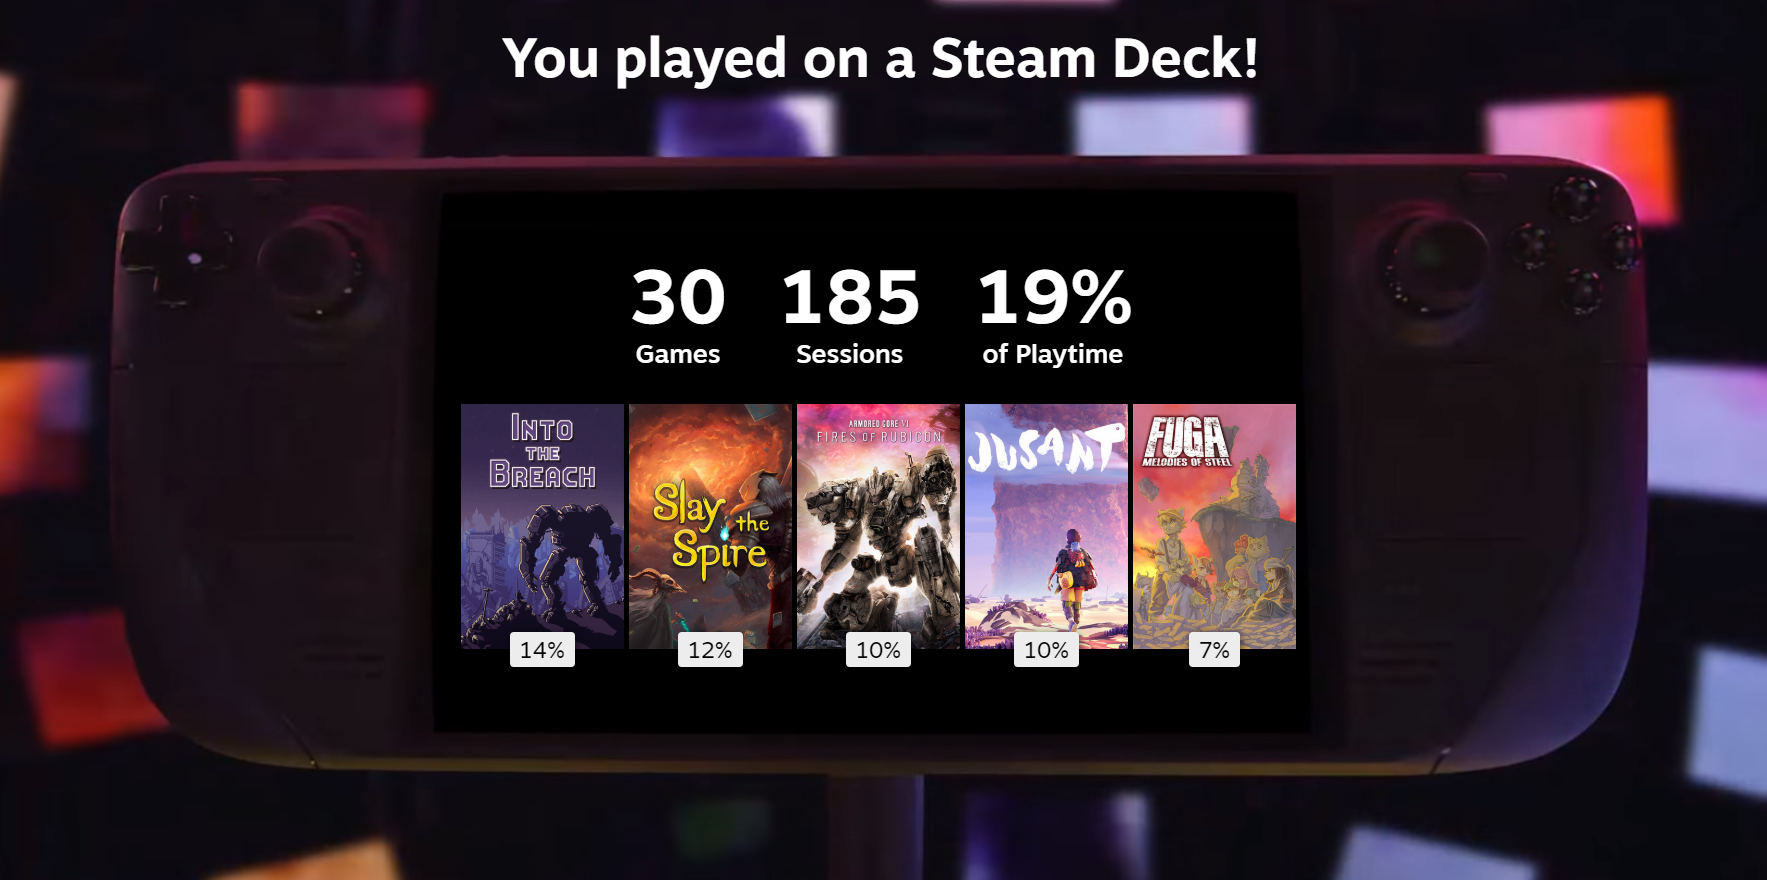 Games played on steam deck.